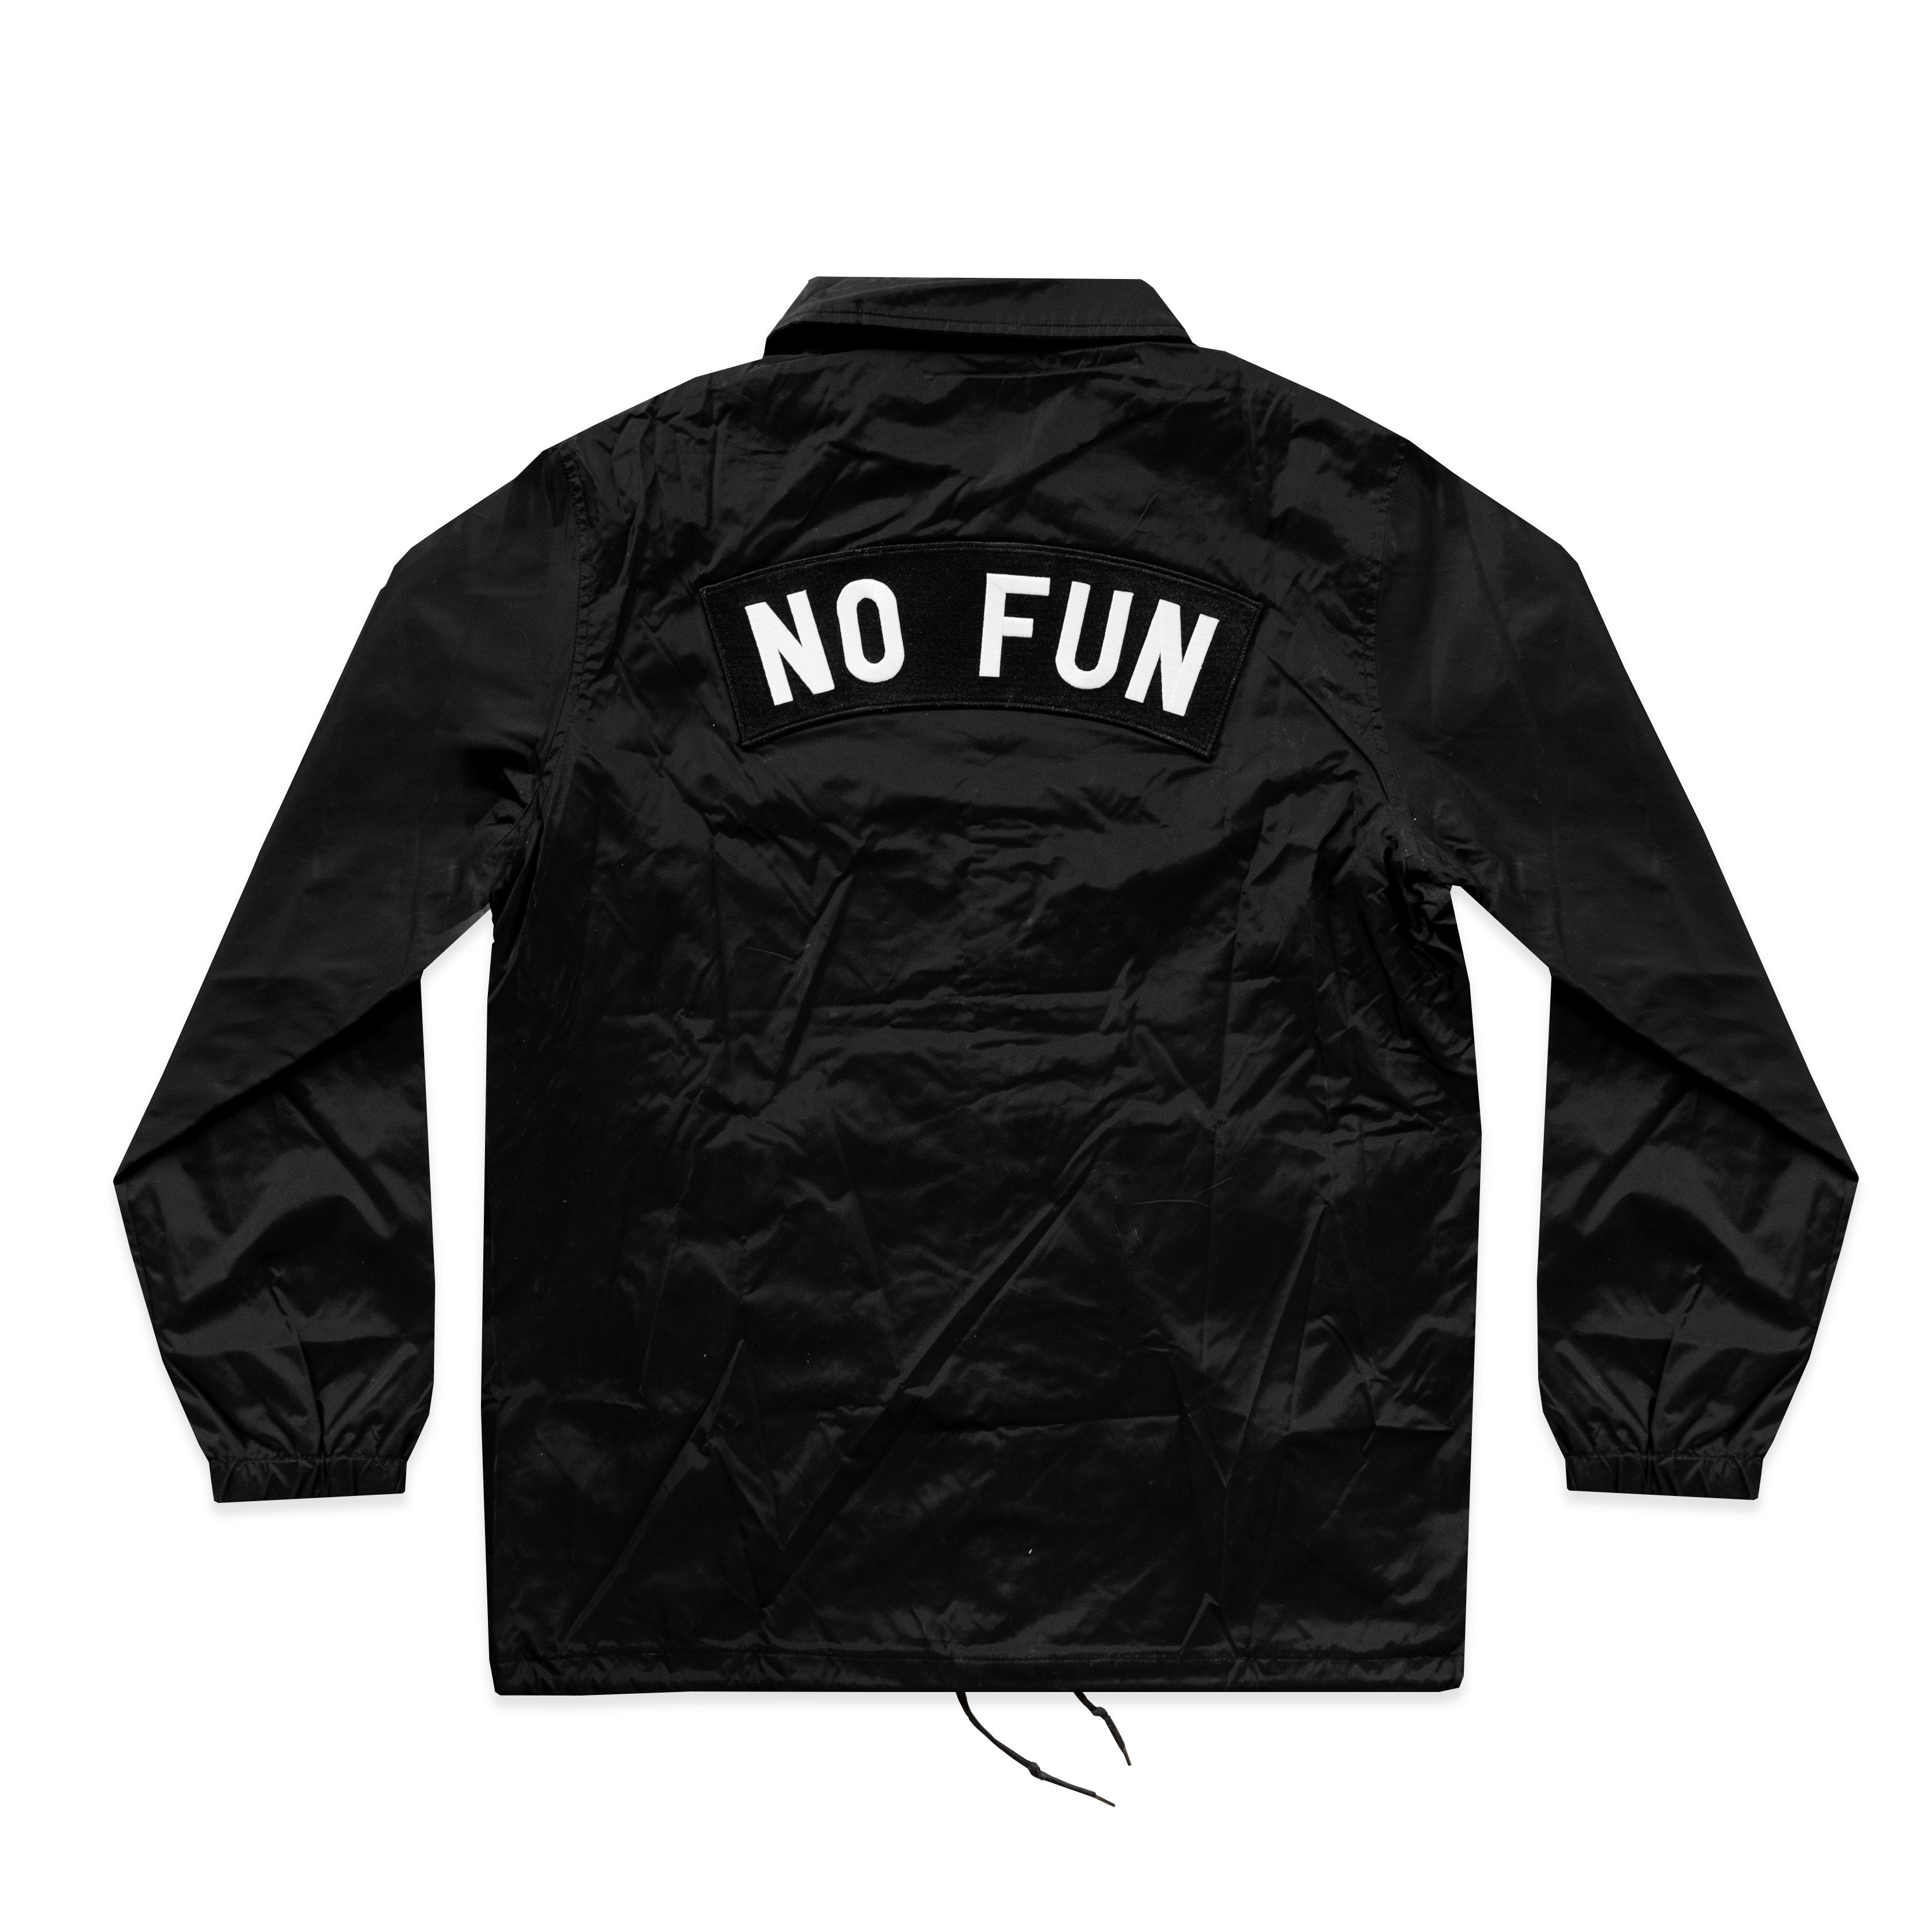 Photo of the backside of the "NO FUN®" X "Crawling Death" coaches jacket. The jacket is black and features an oversized "NO FUN®" rocker patch that sits above the shoulder blades. The jacket utilizes snap closures and drawstring cords at the bottom.